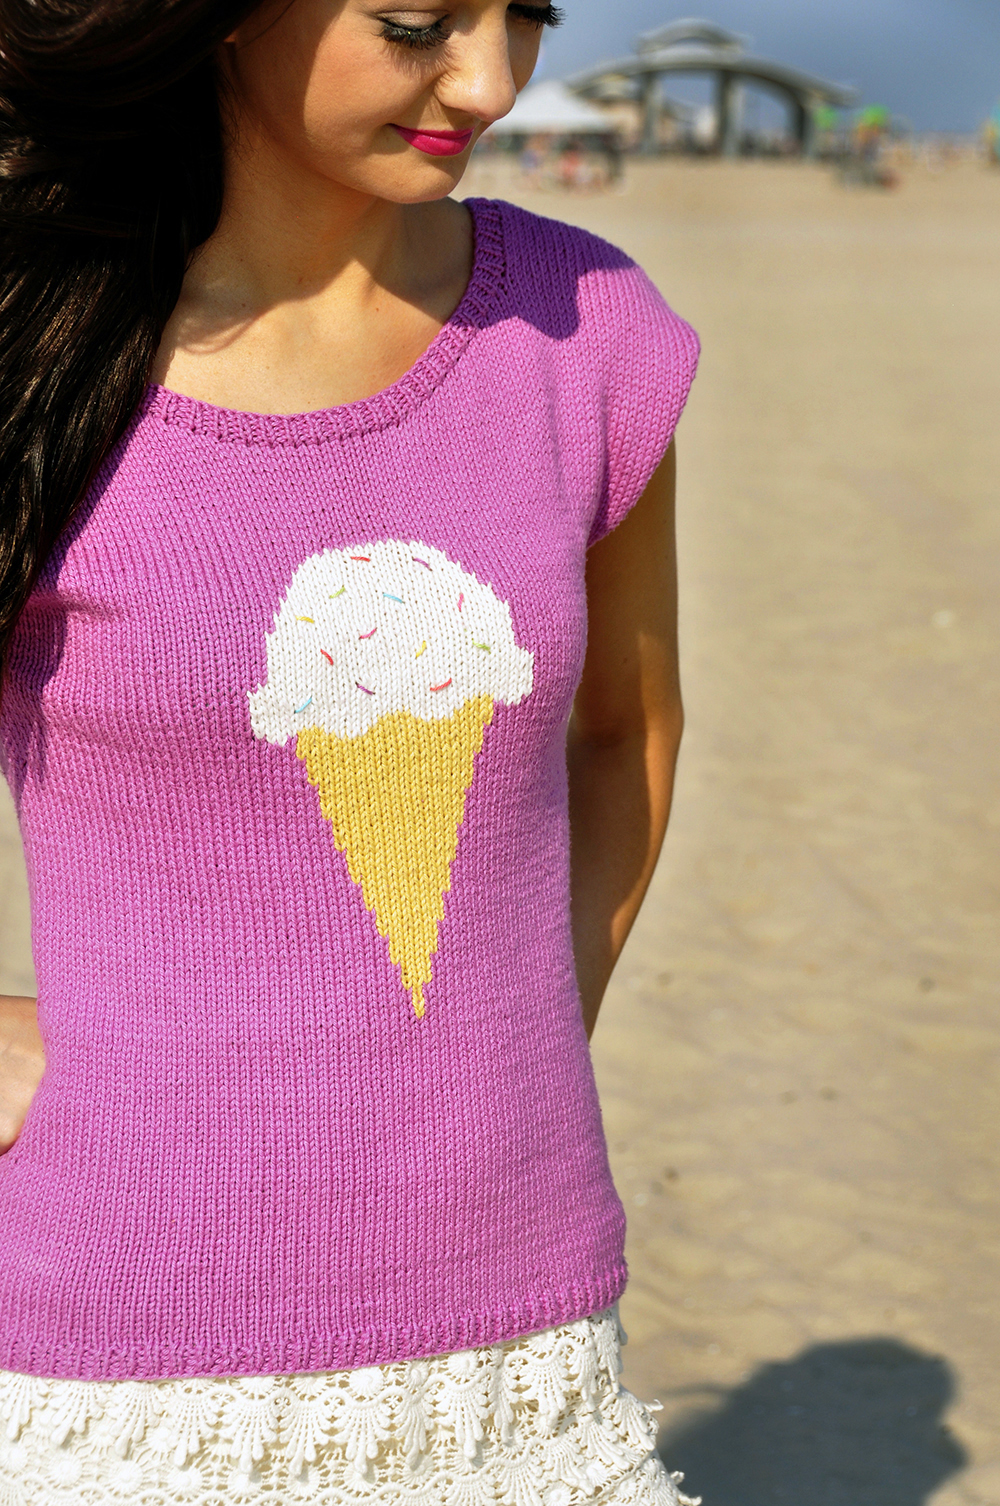 “With Sprinkles on Top” Ice Cream T-Shirt with Bow Back